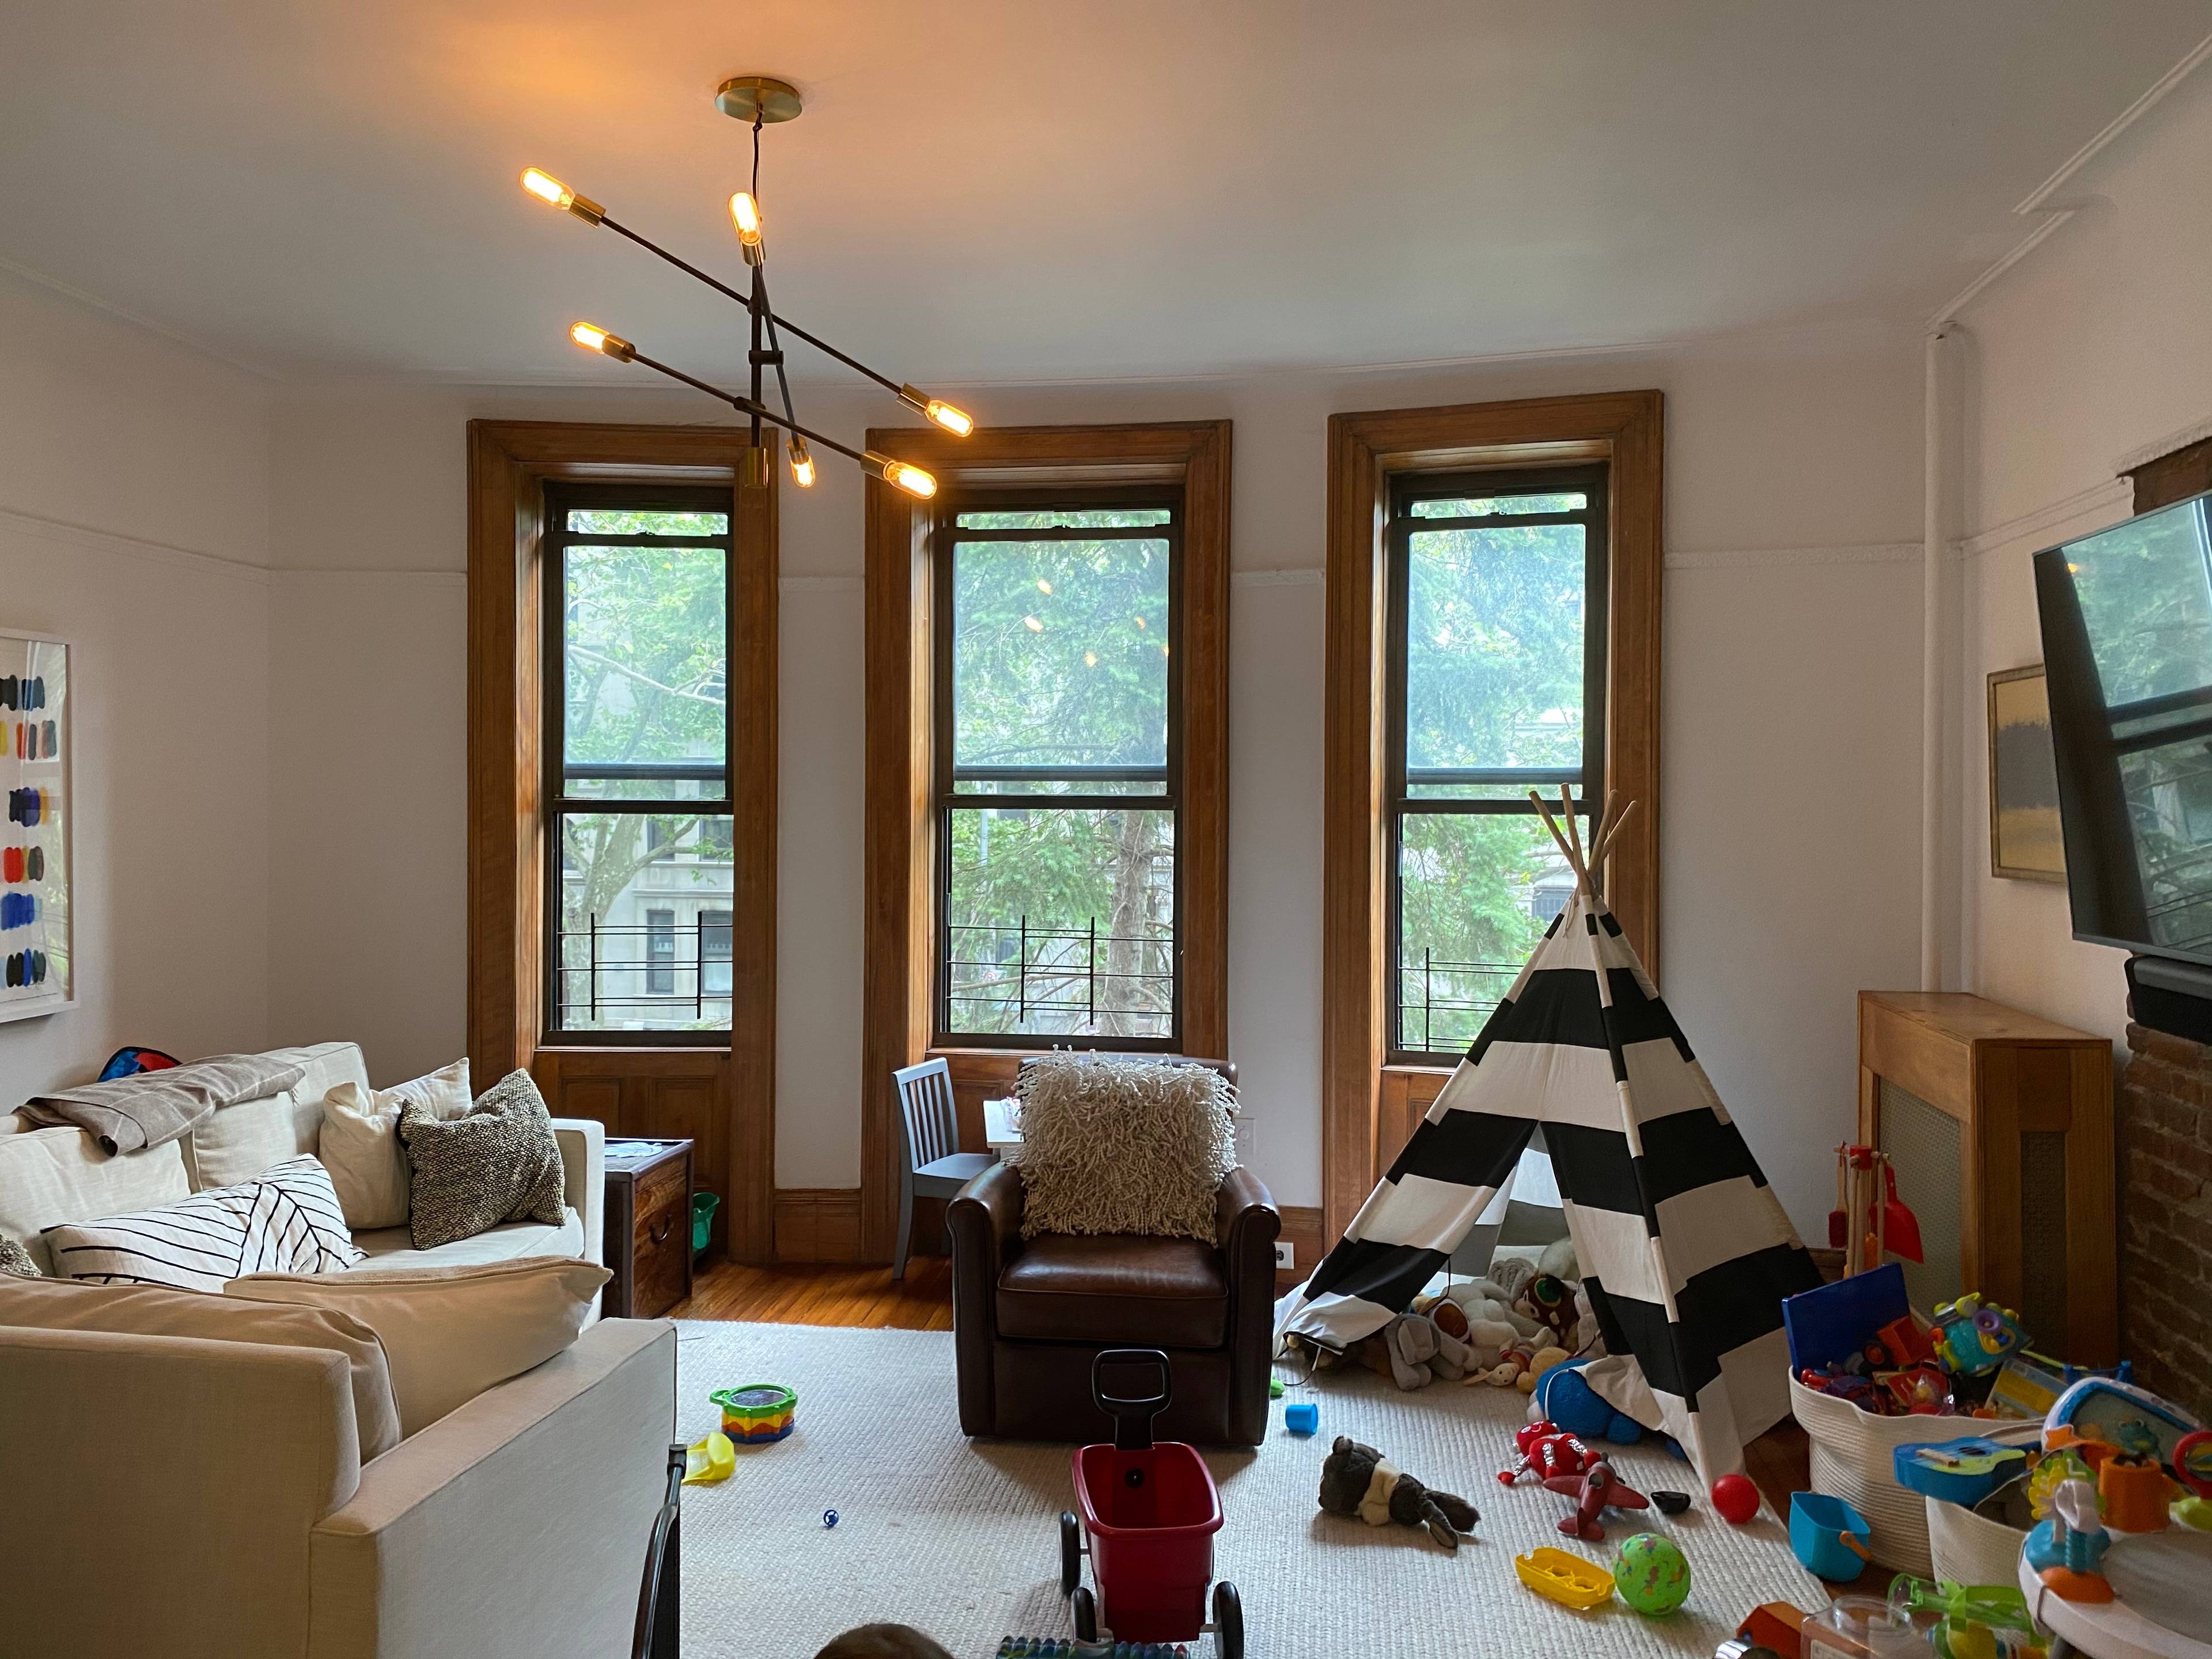 IMPRESSIVE one of a kind floorthrough home in the most desirable block of Park Slope.